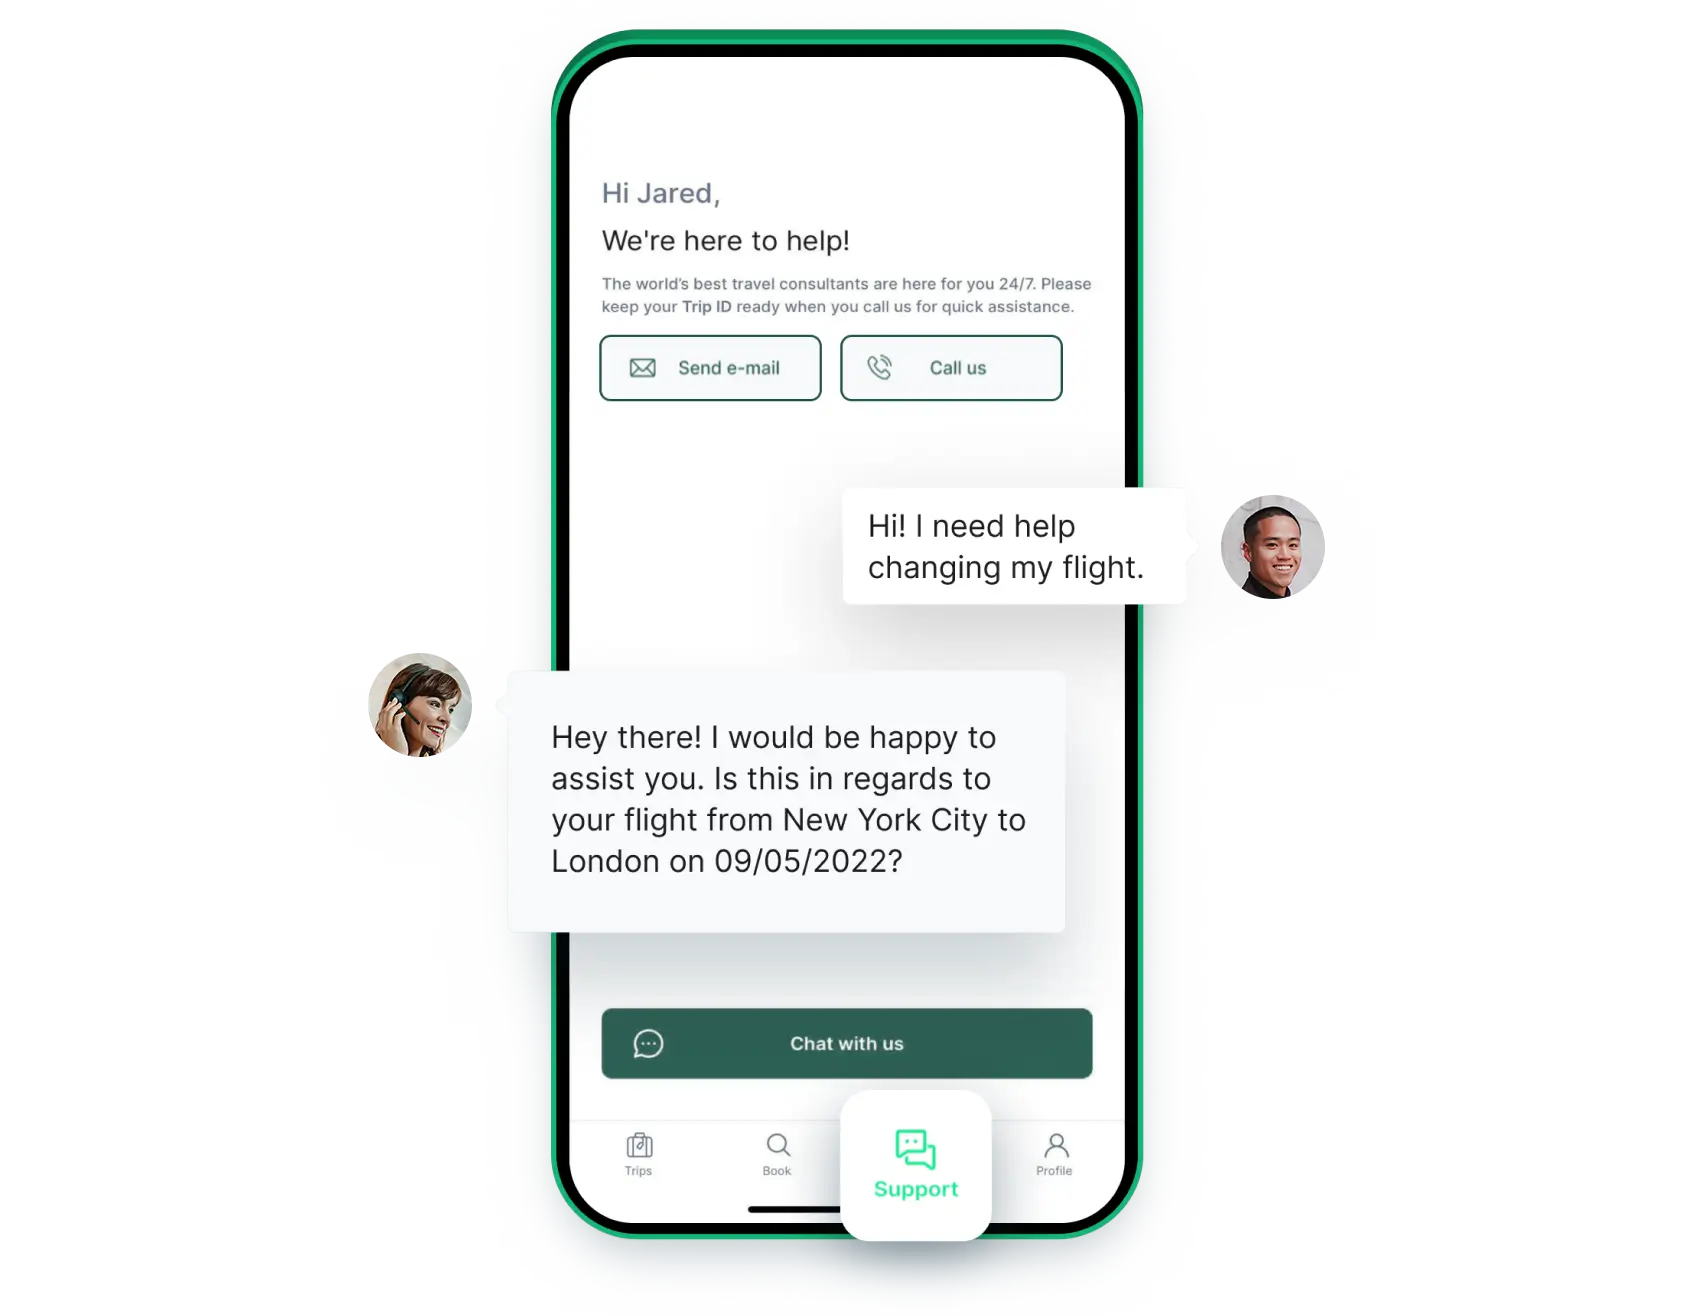 Empower your employees to manage their travel plans autonomously by booking, modifying, or canceling tickets directly within the app.